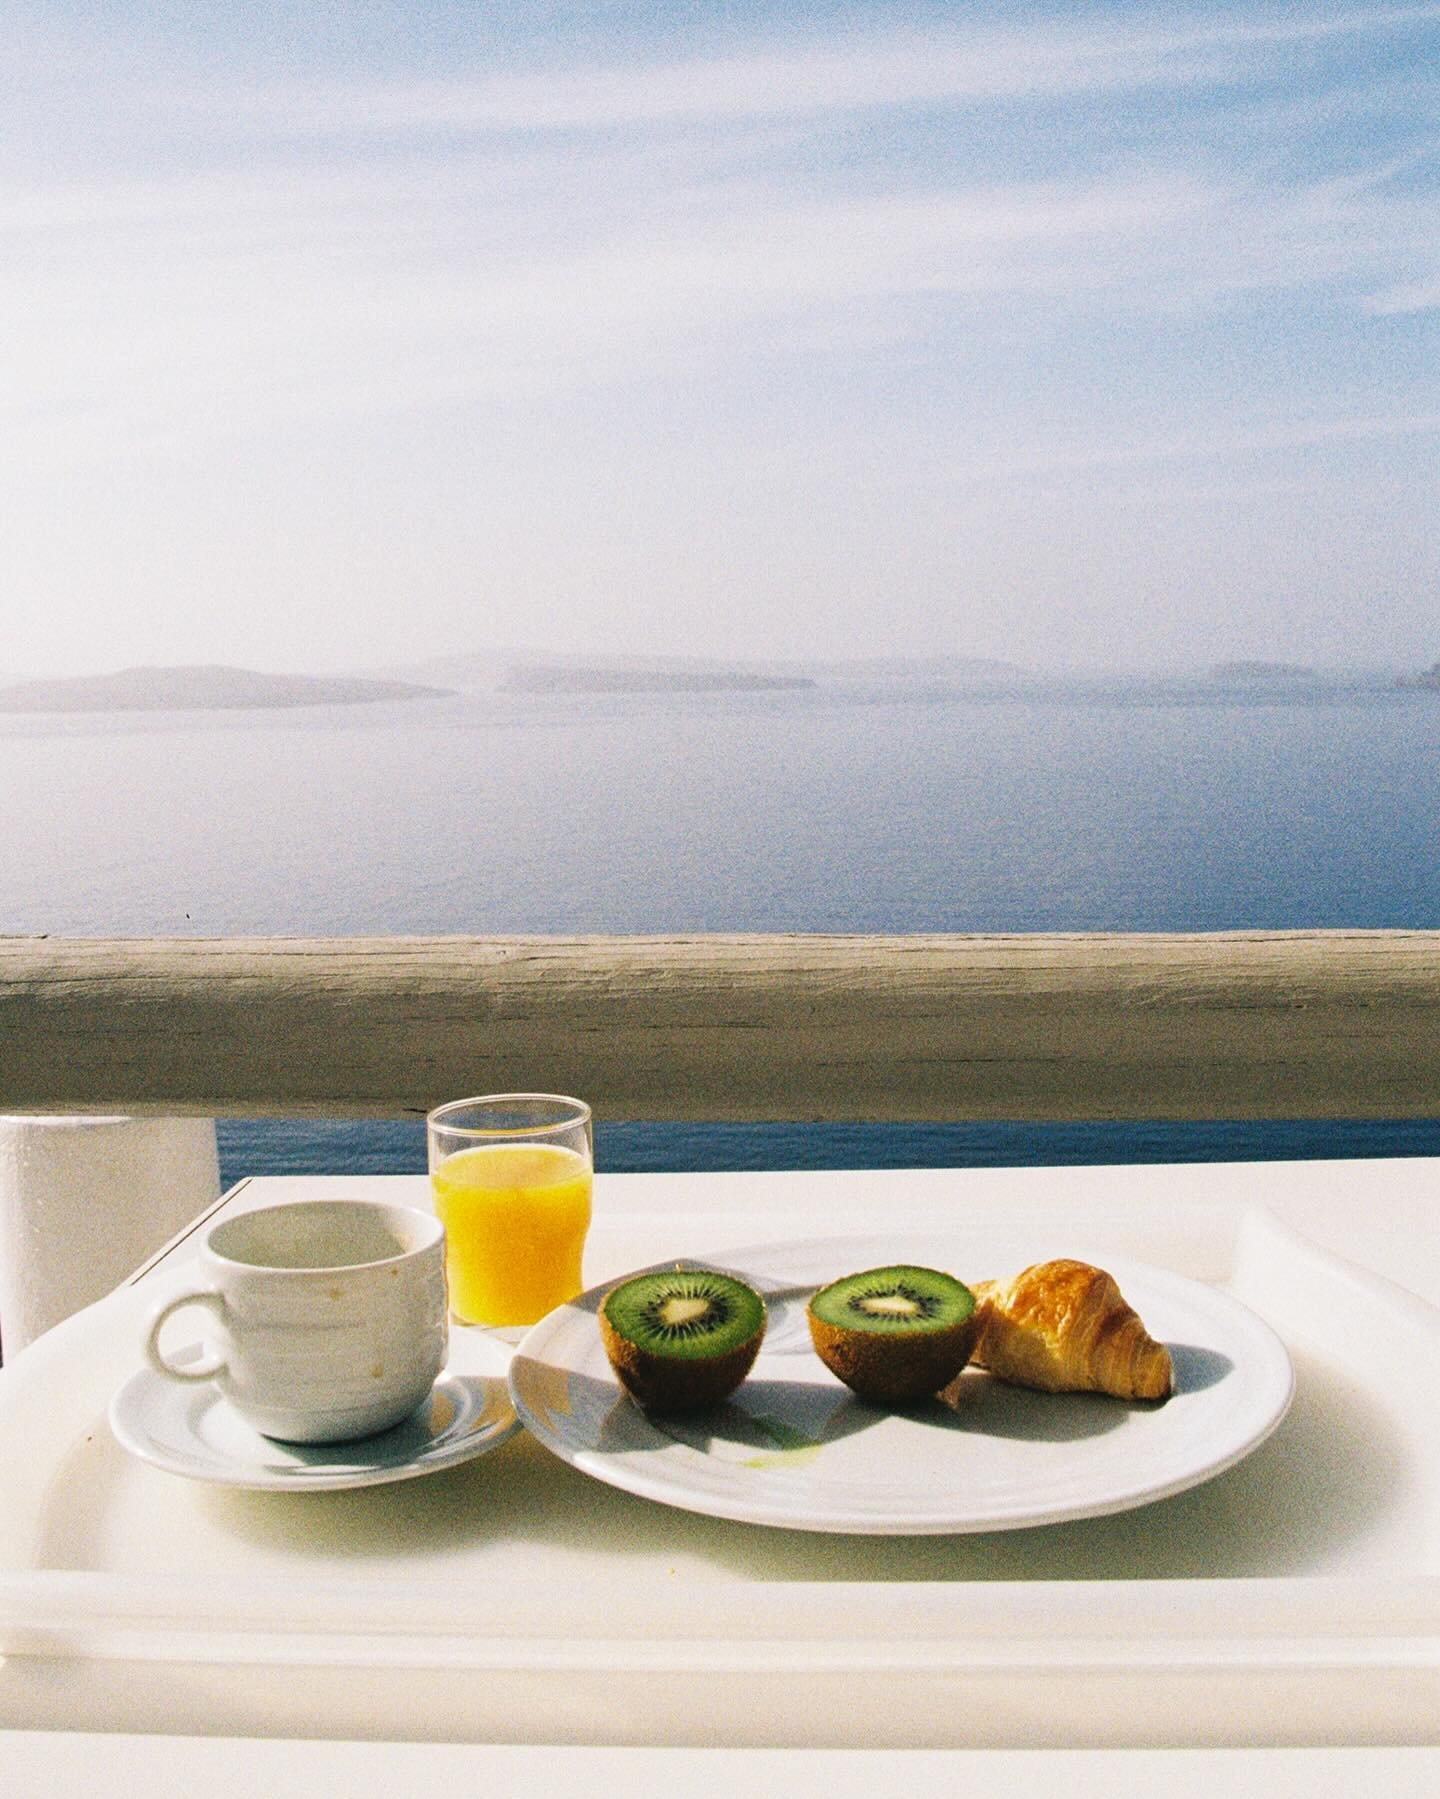 breakfast with a view 🥝🍊